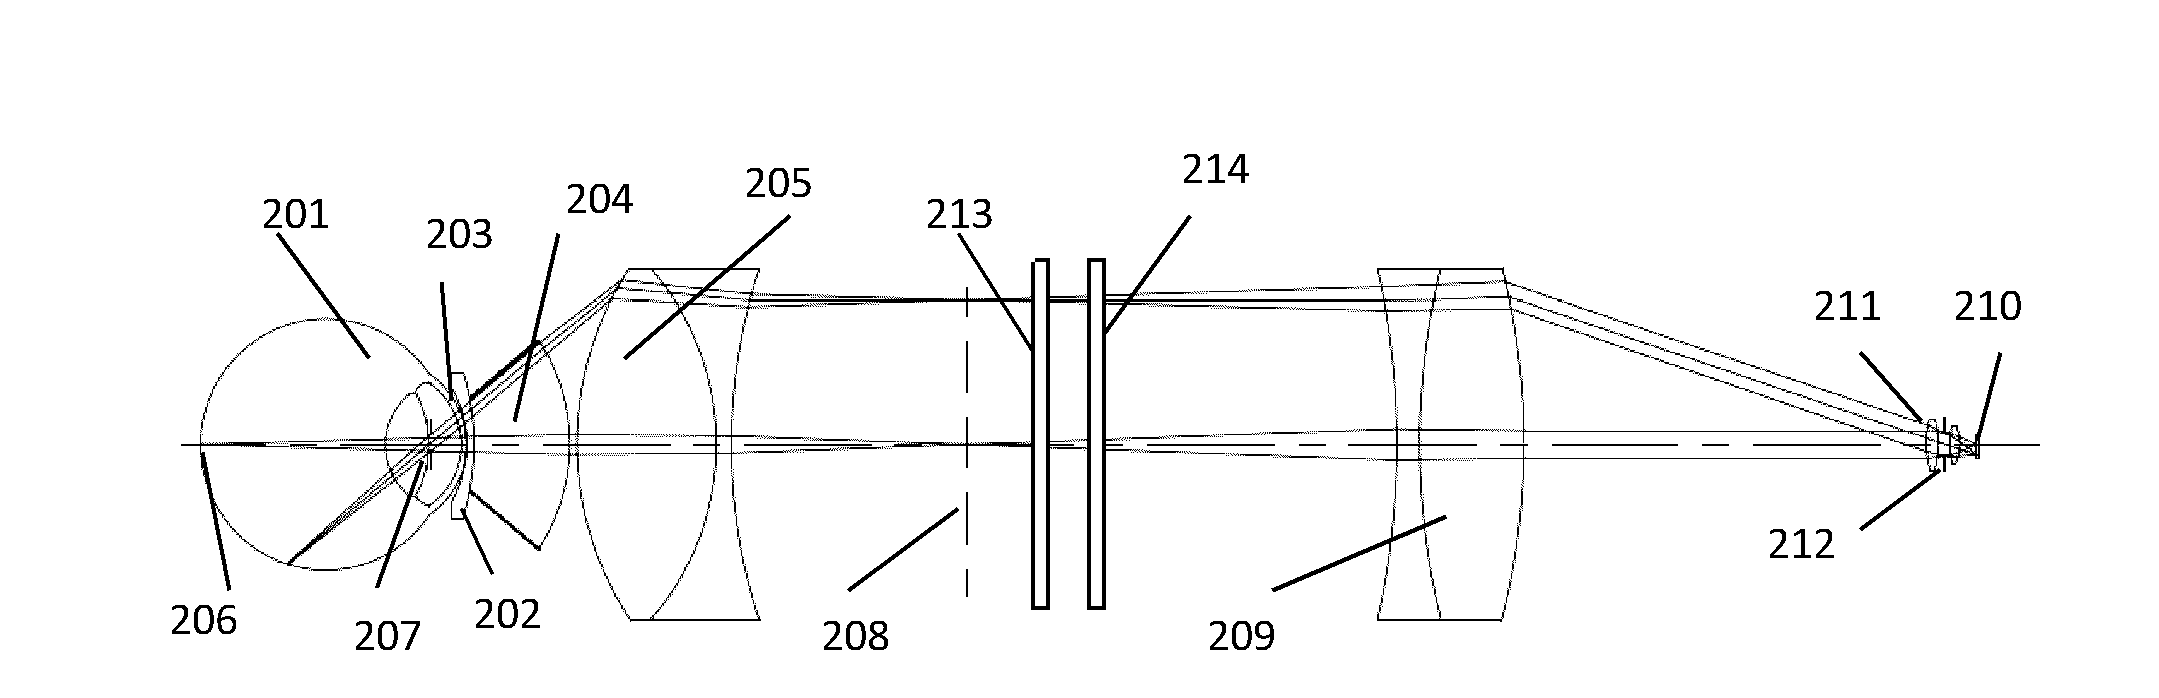 Eye imaging apparatus with a wide field of view and related methods